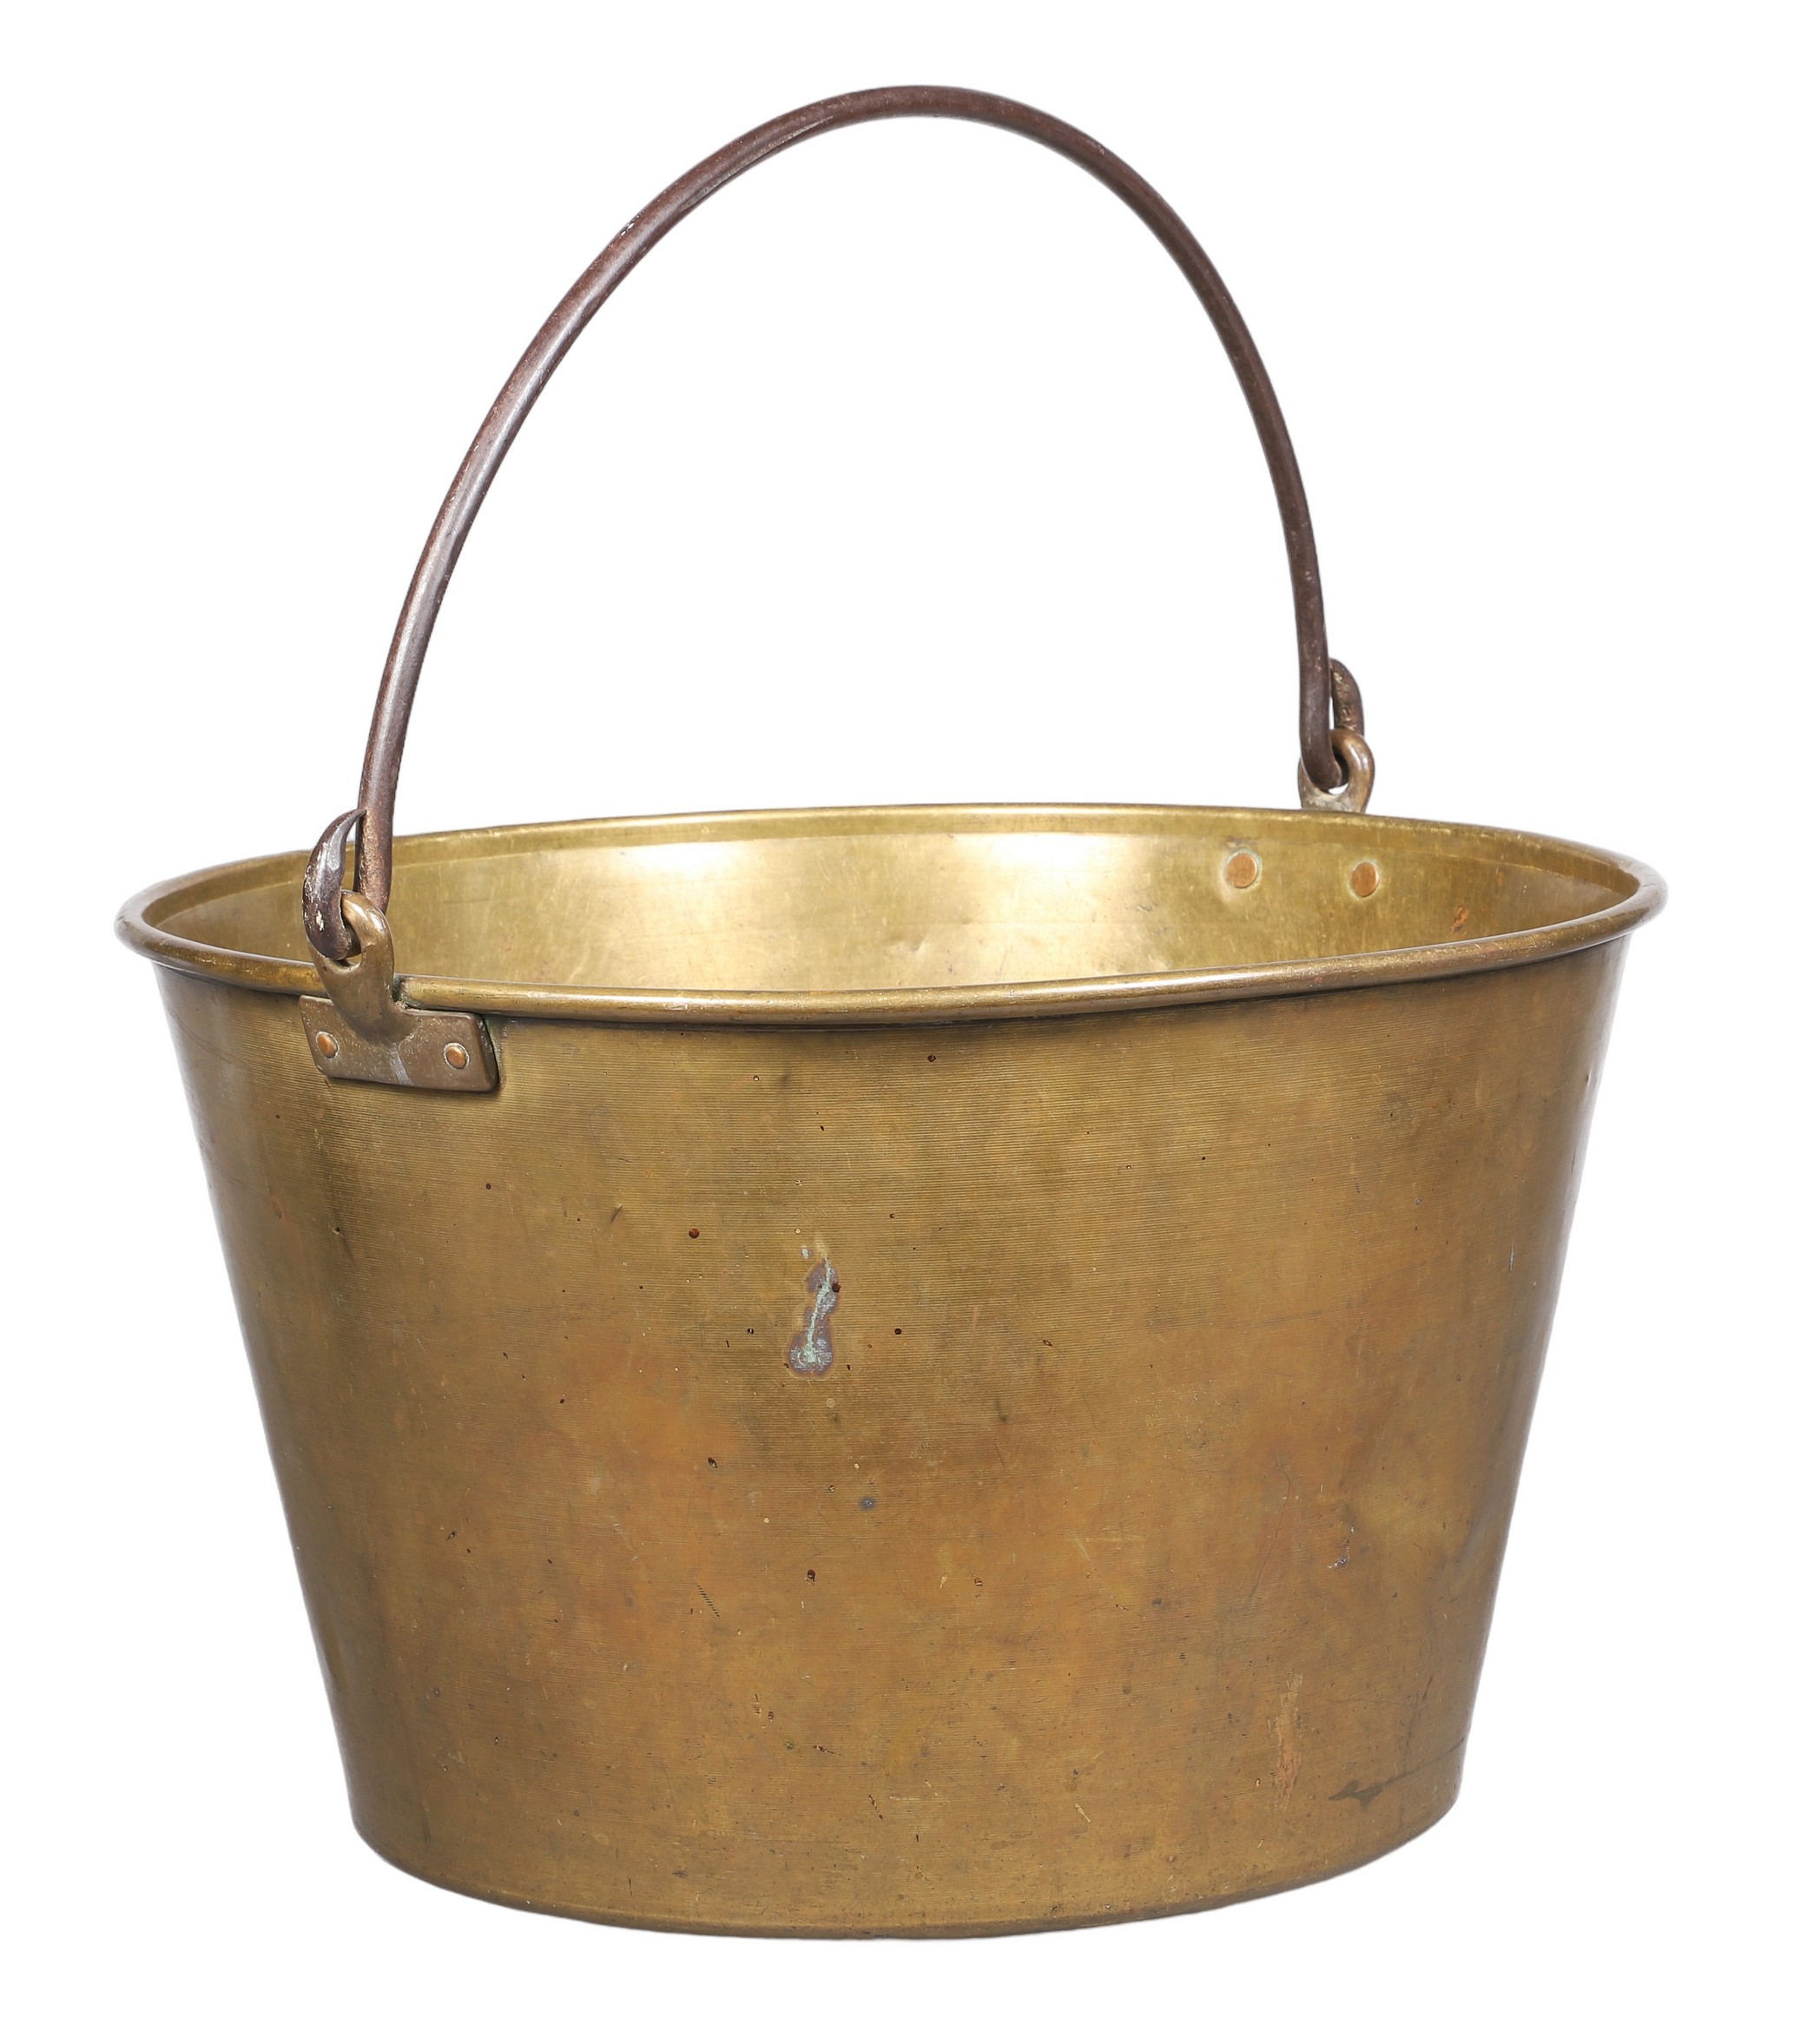 A very large brass kettle with 2e0c6e